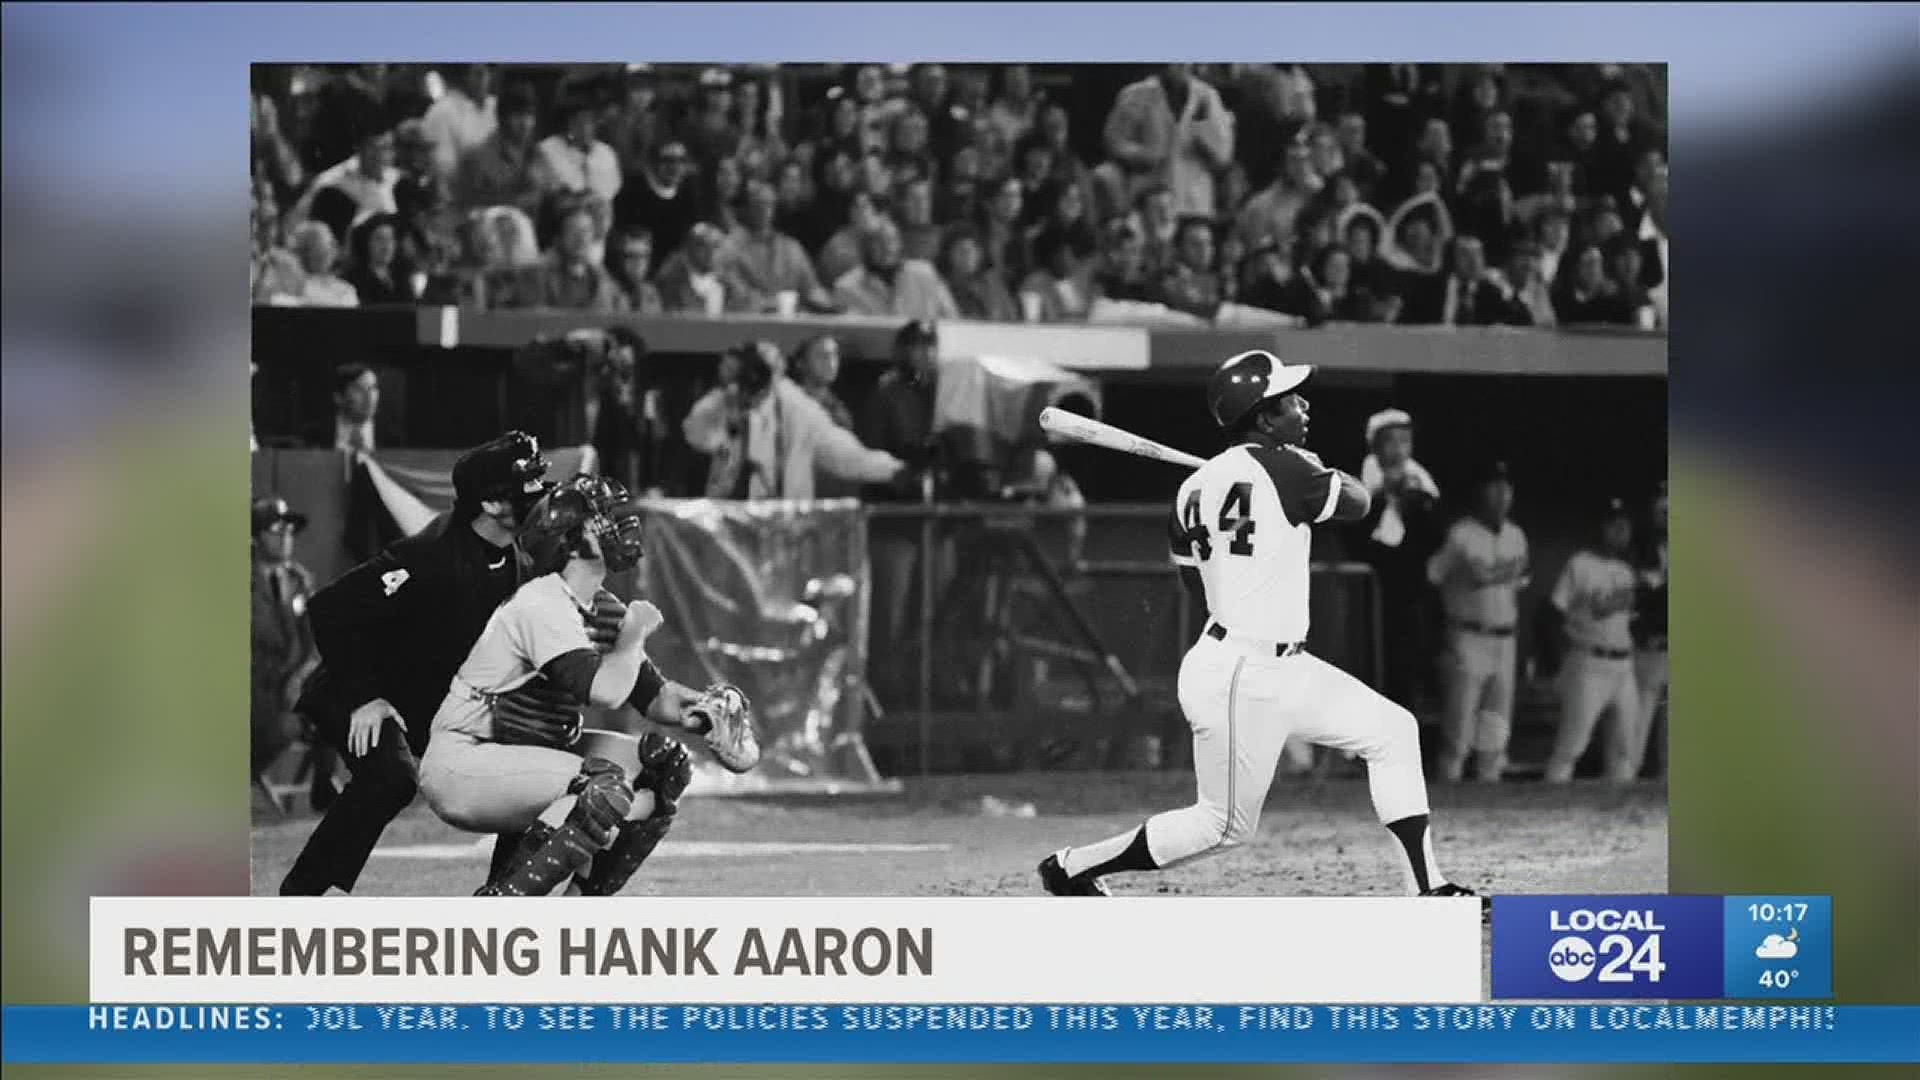 Hank Aaron was known for his philanthropy and helping others